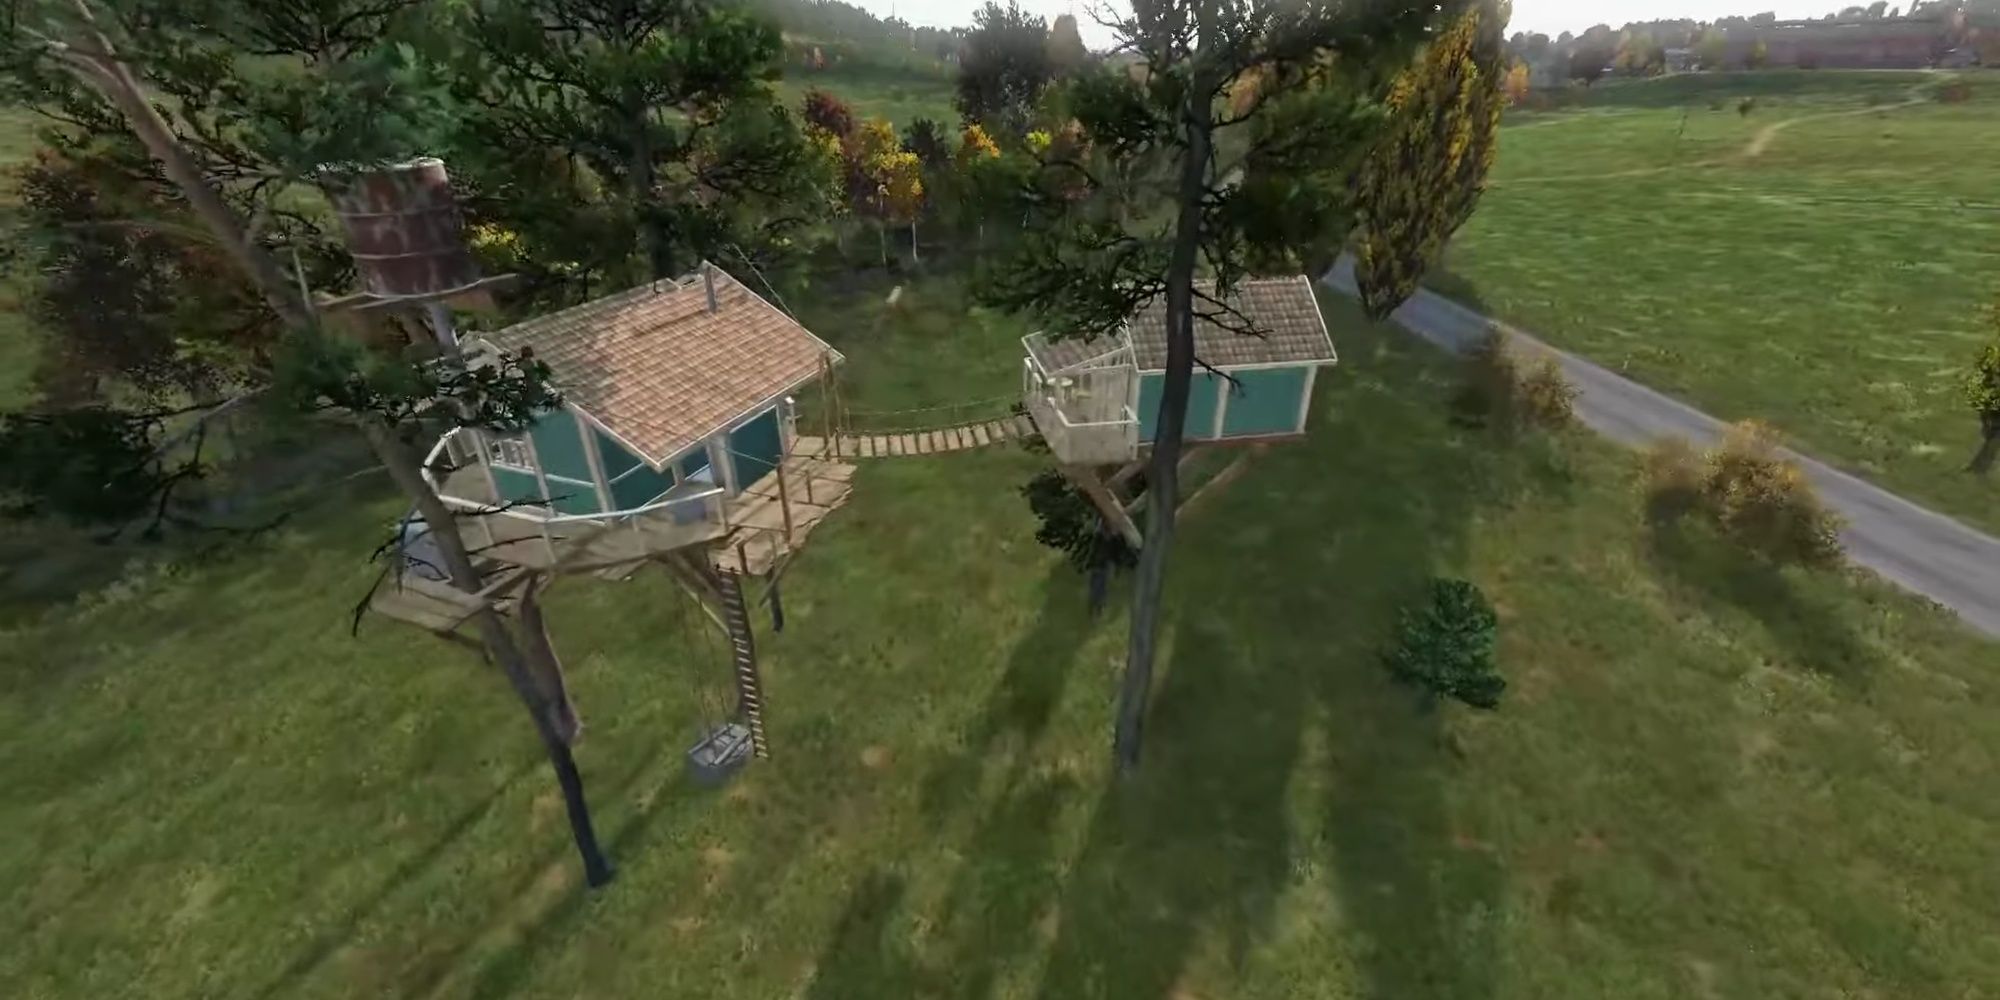 DayZ: Treehouse Mod Adding A Treetop Hideaway For Players